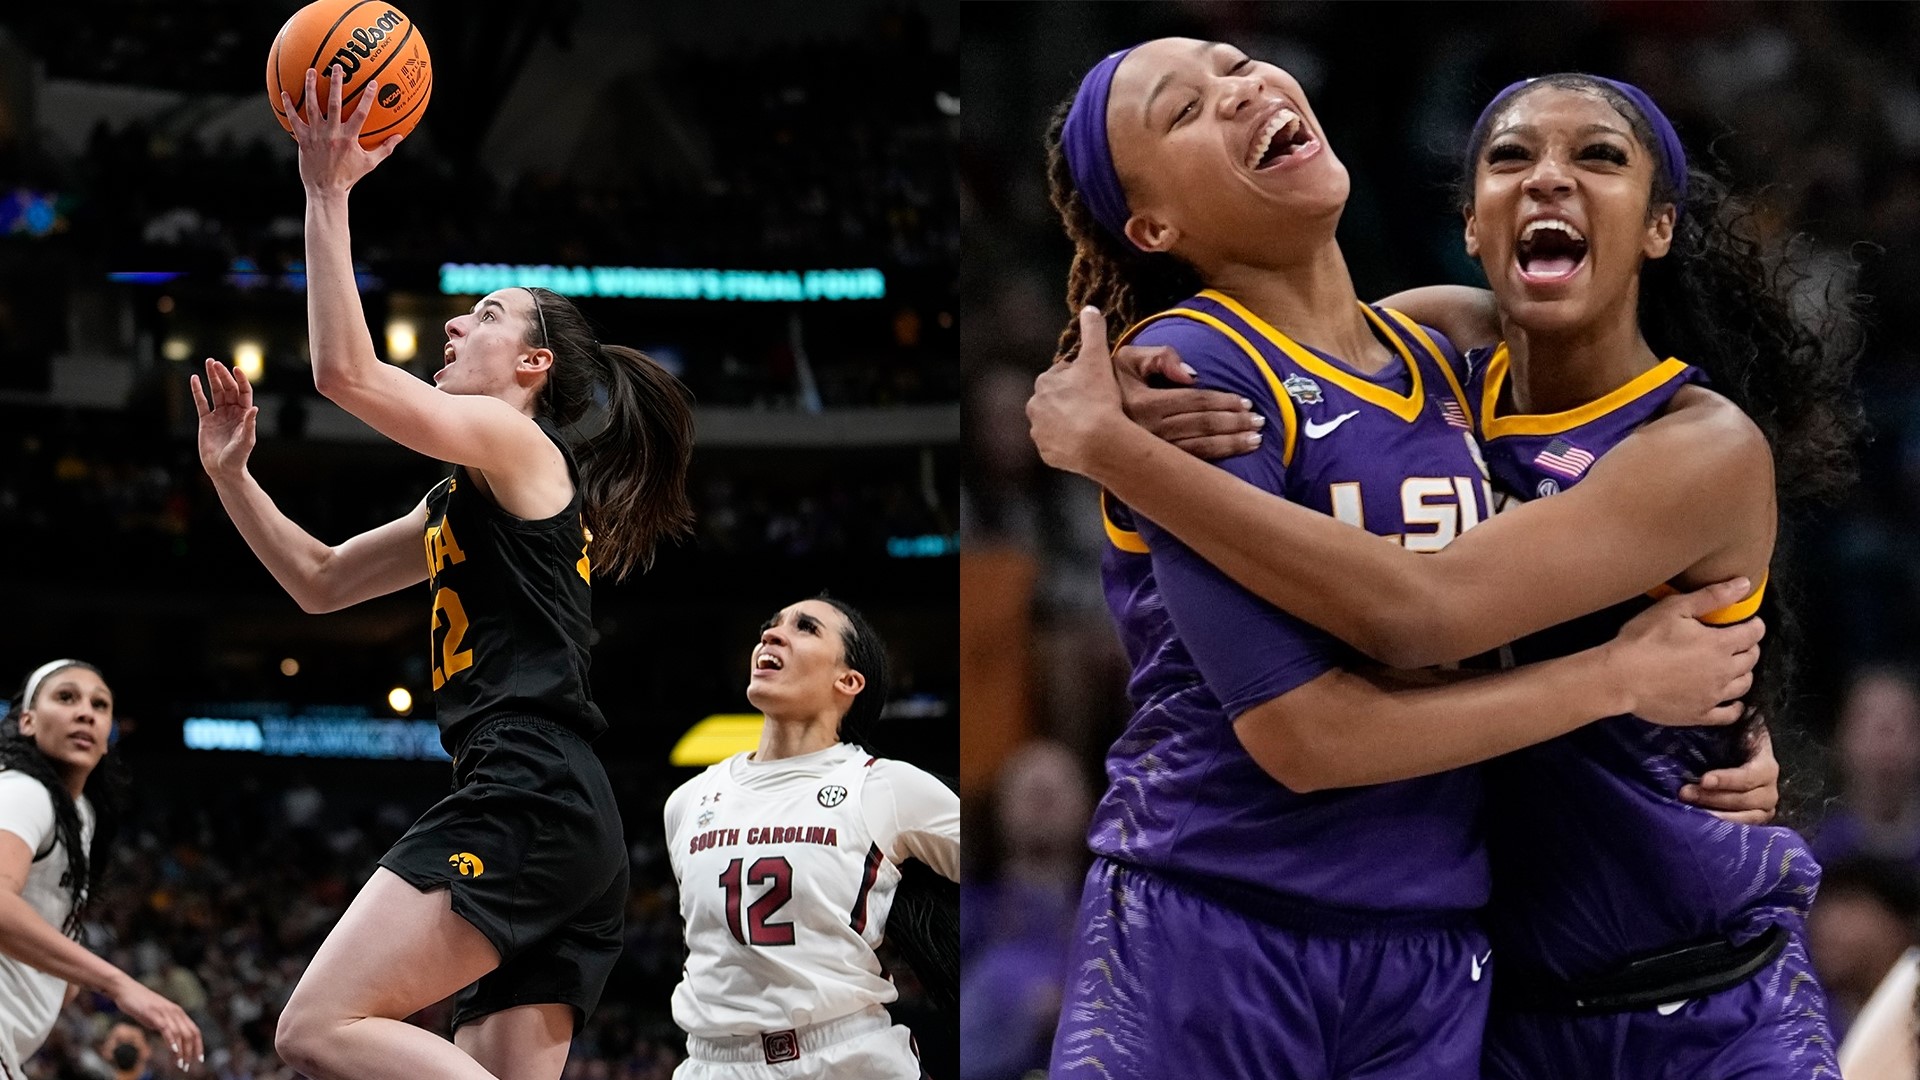 It's the first Final Four for the Hawkeyes in 30 years. The title game will be a showcase of star guards with Iowa's Caitlin Clark and LSU's Alexis Morris.